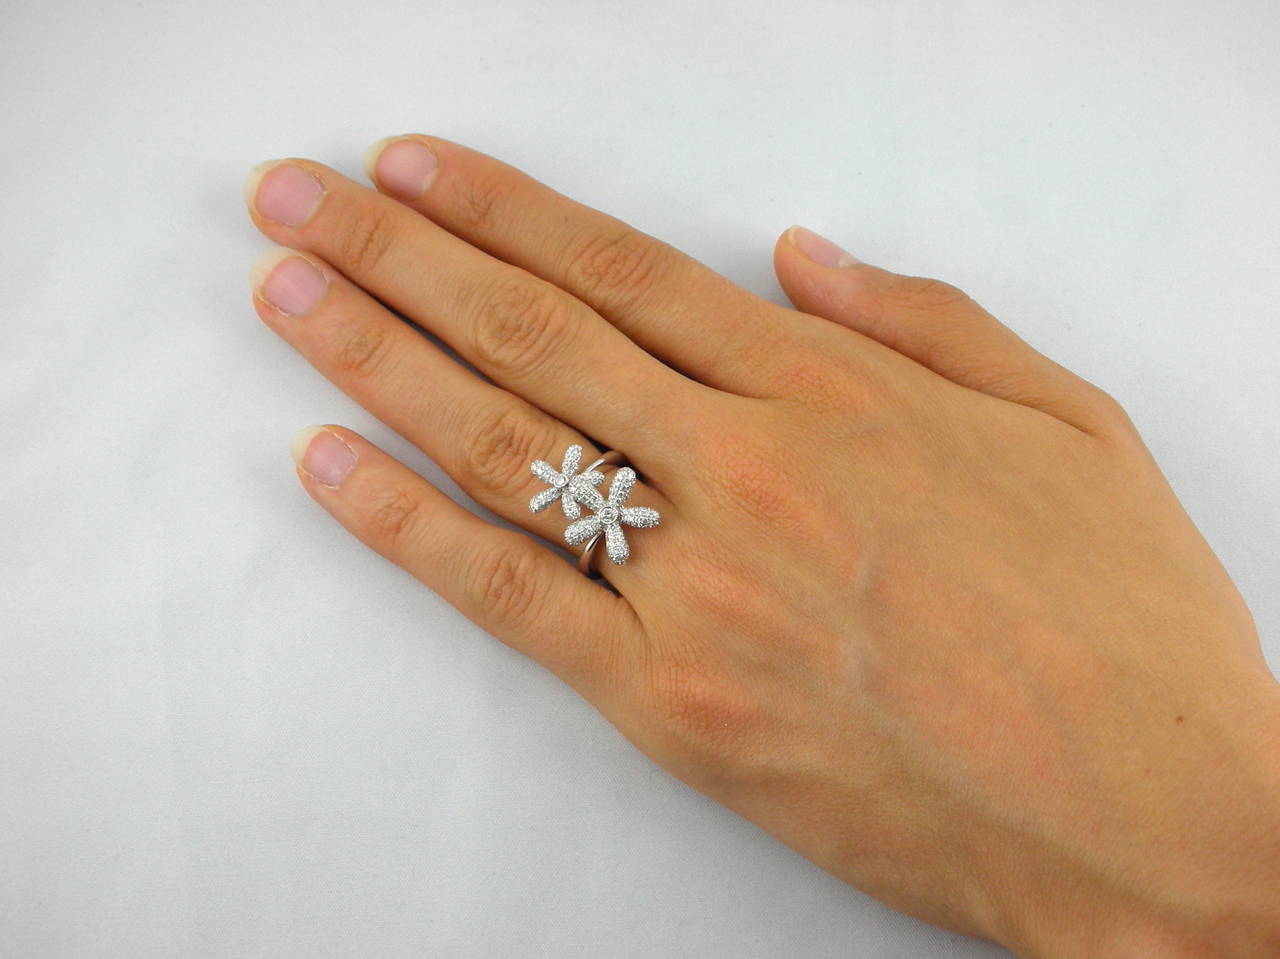 Jona design collection, hand crafted in Italy,18 karat white gold, diamond pavé daisy ring, set with 1 carat of white diamonds, F color, VVS1 clarity. US size 6.5
All Jona jewelry is new and has never been previously owned or worn. Each item will